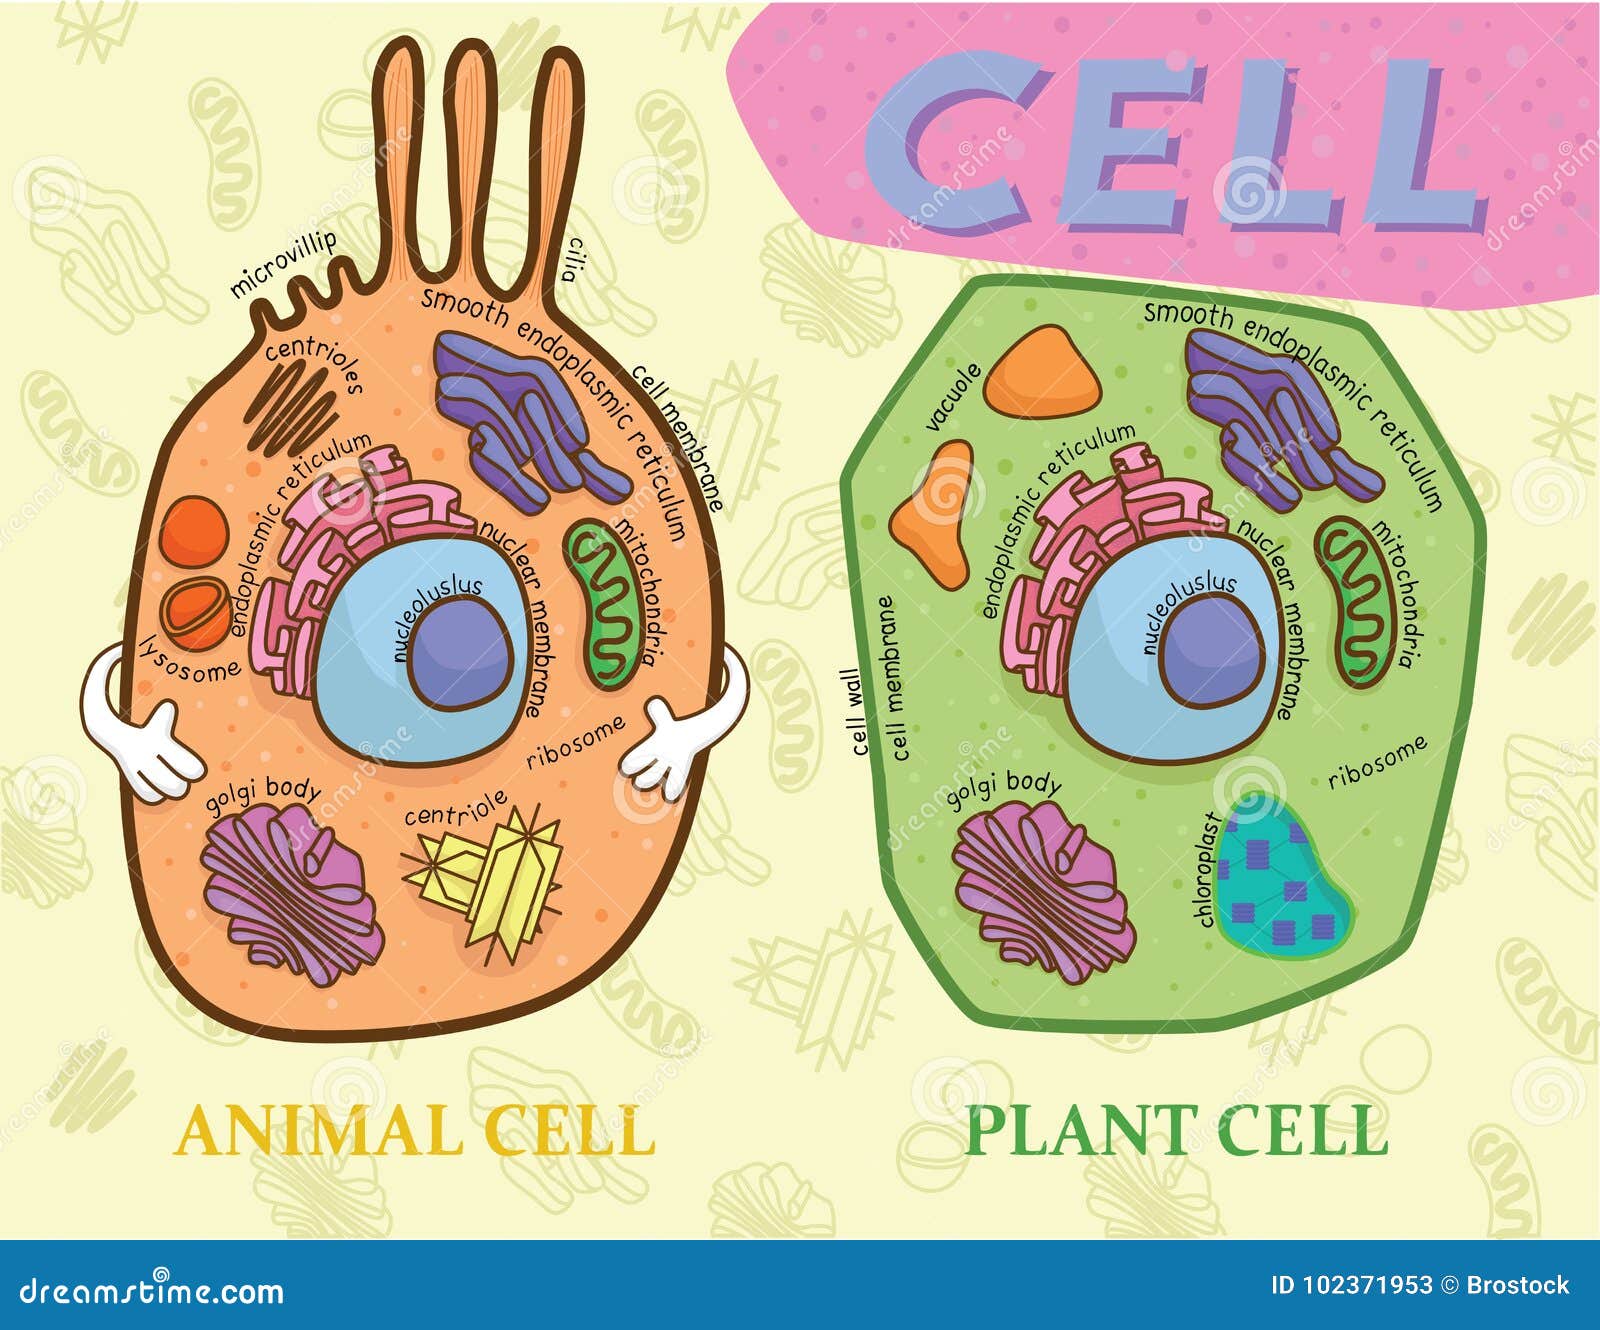 Pencil Animal Cell Drawing - animals Pencil Drawing